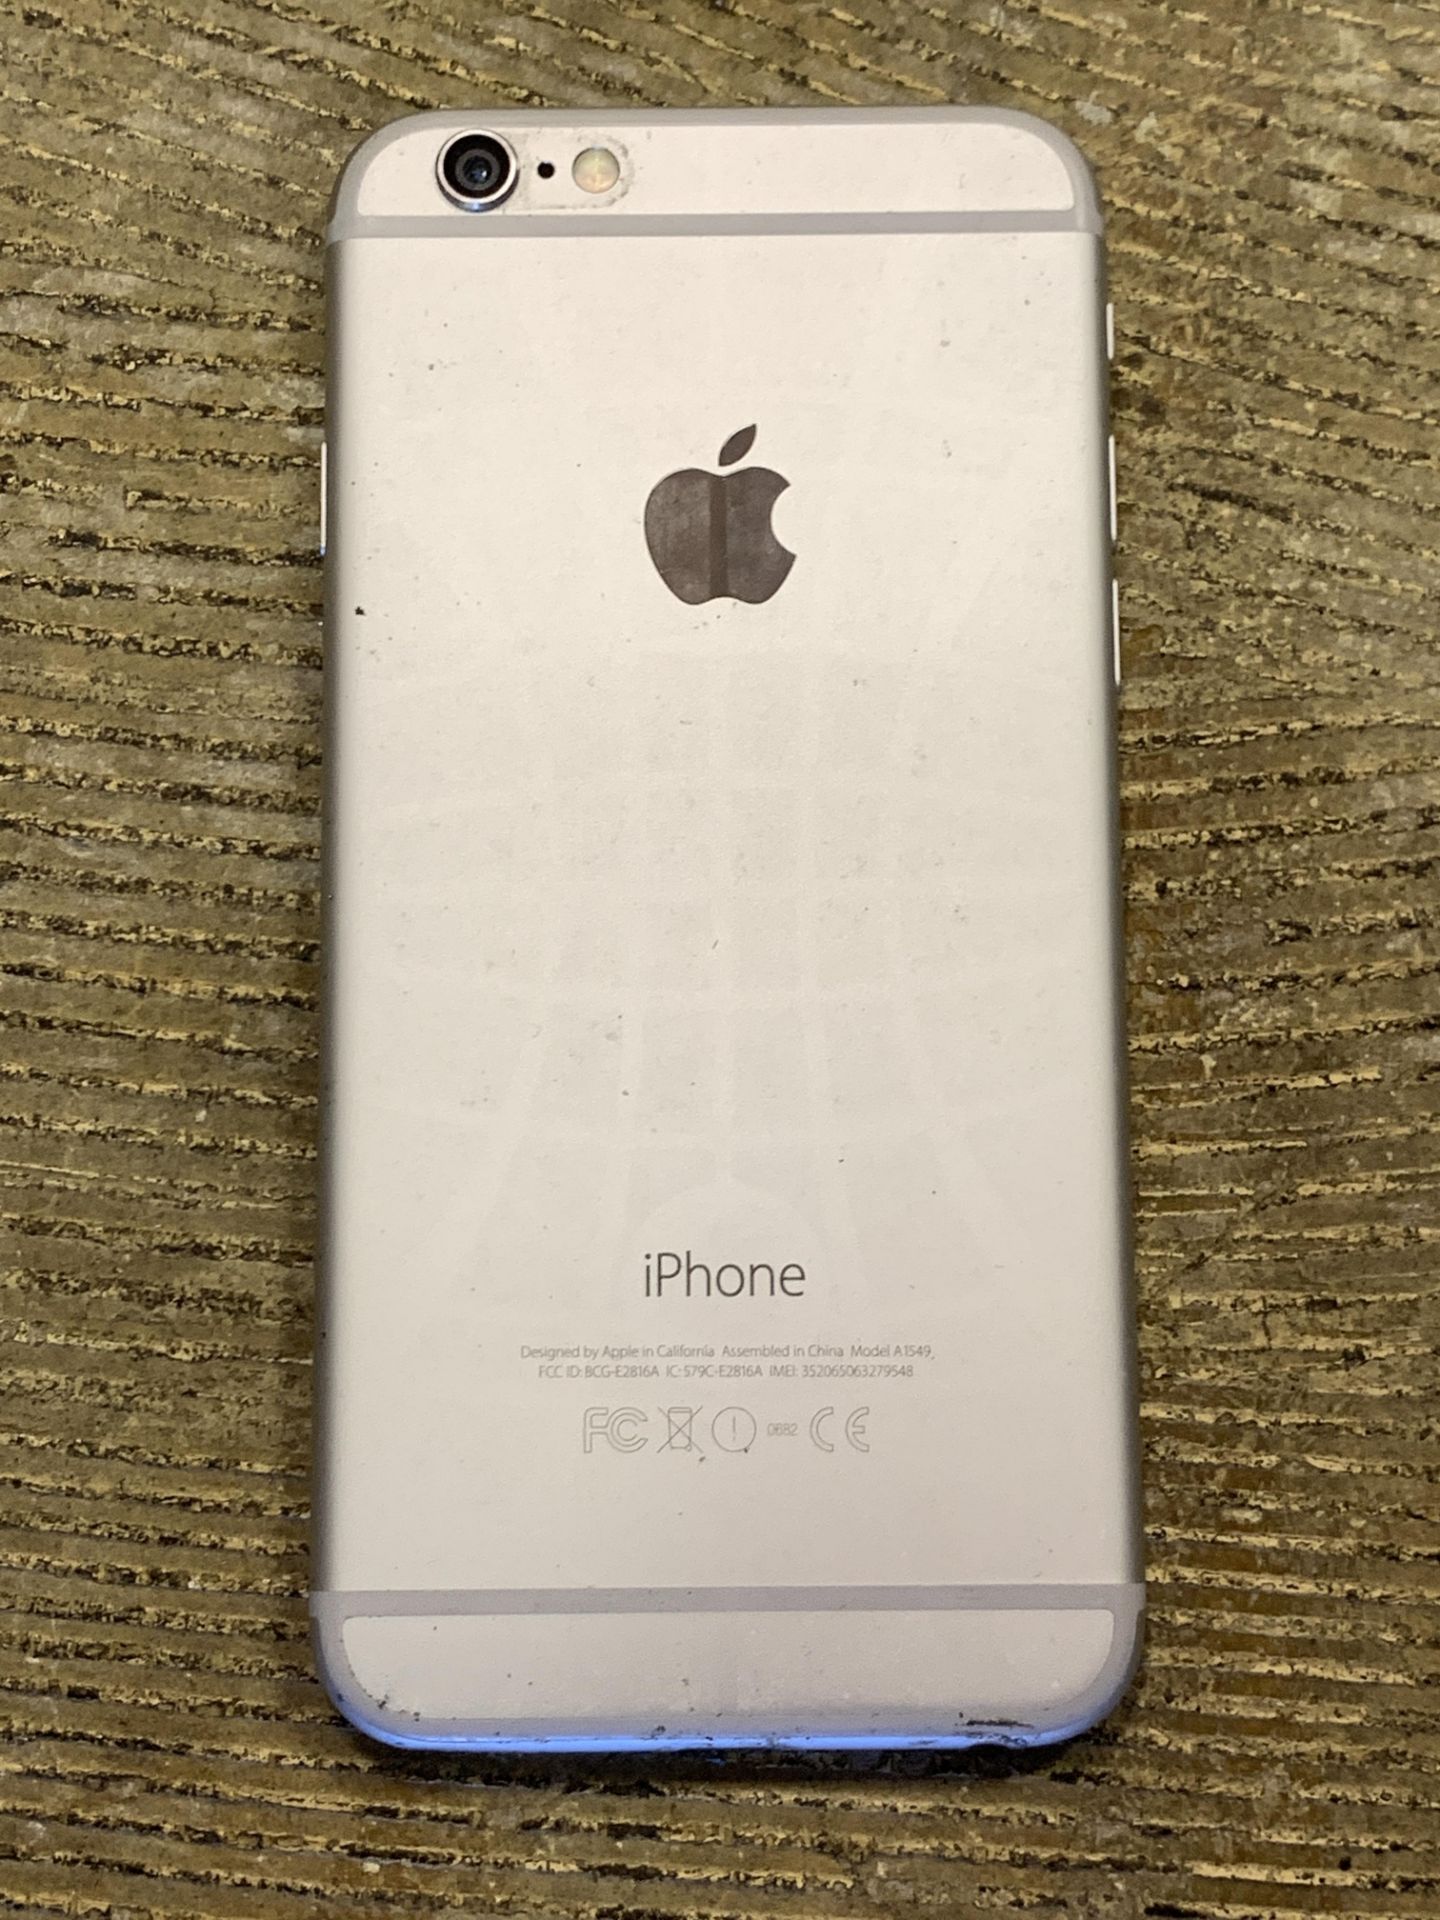 IPHONE 6 with Case - Image 3 of 4